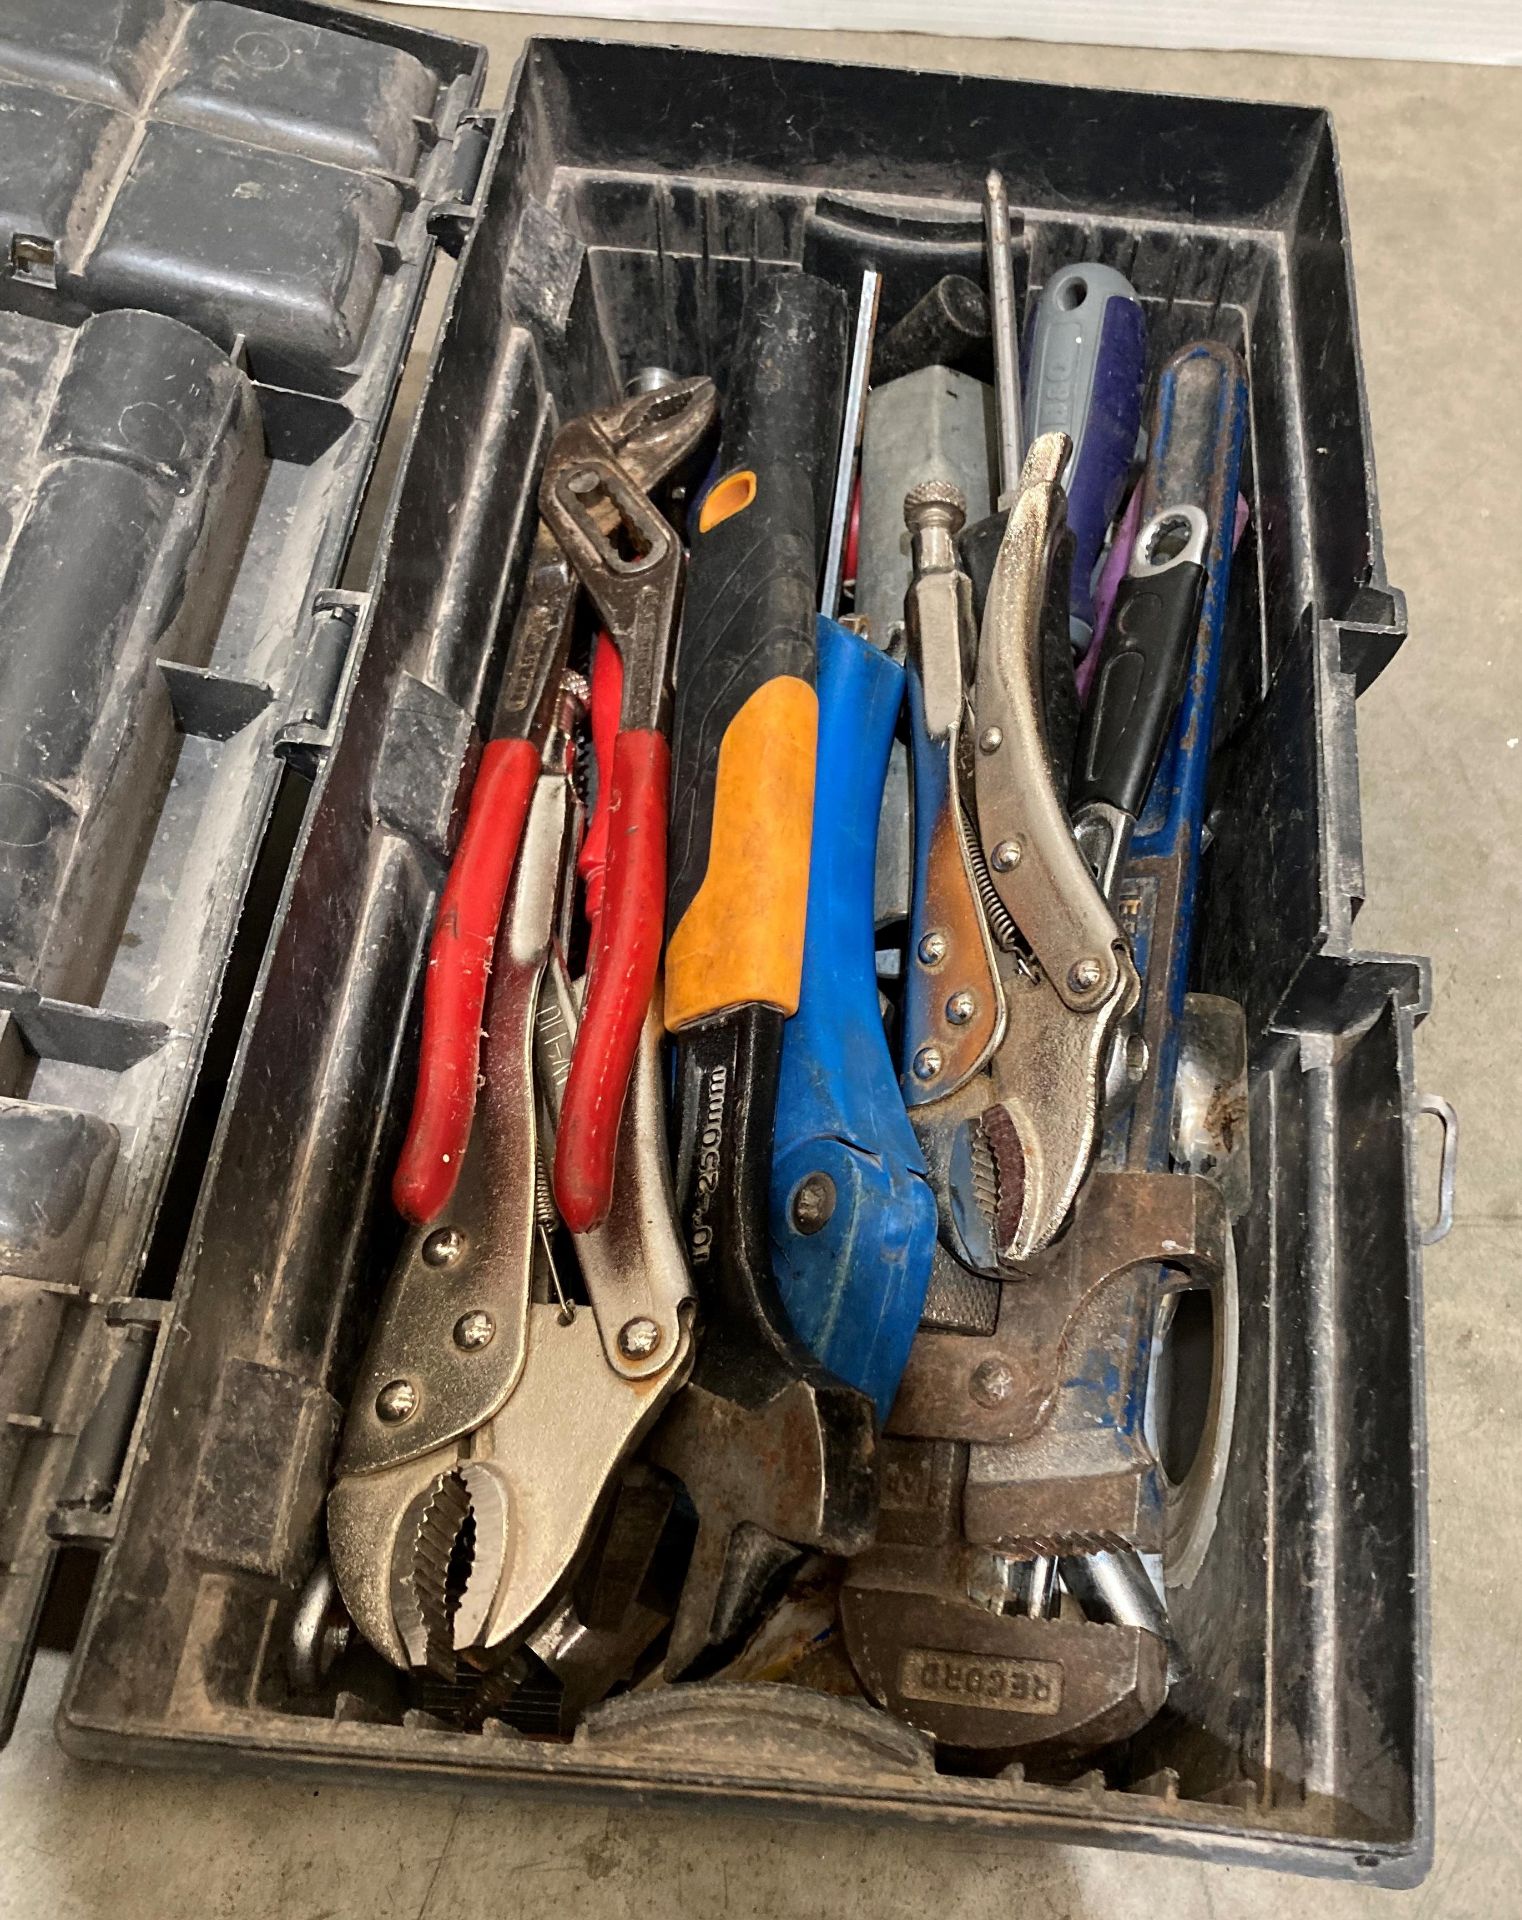 3 x assorted tool boxes and contents - assorted hand tools, spanners, screwdrivers, pliers, - Bild 3 aus 4